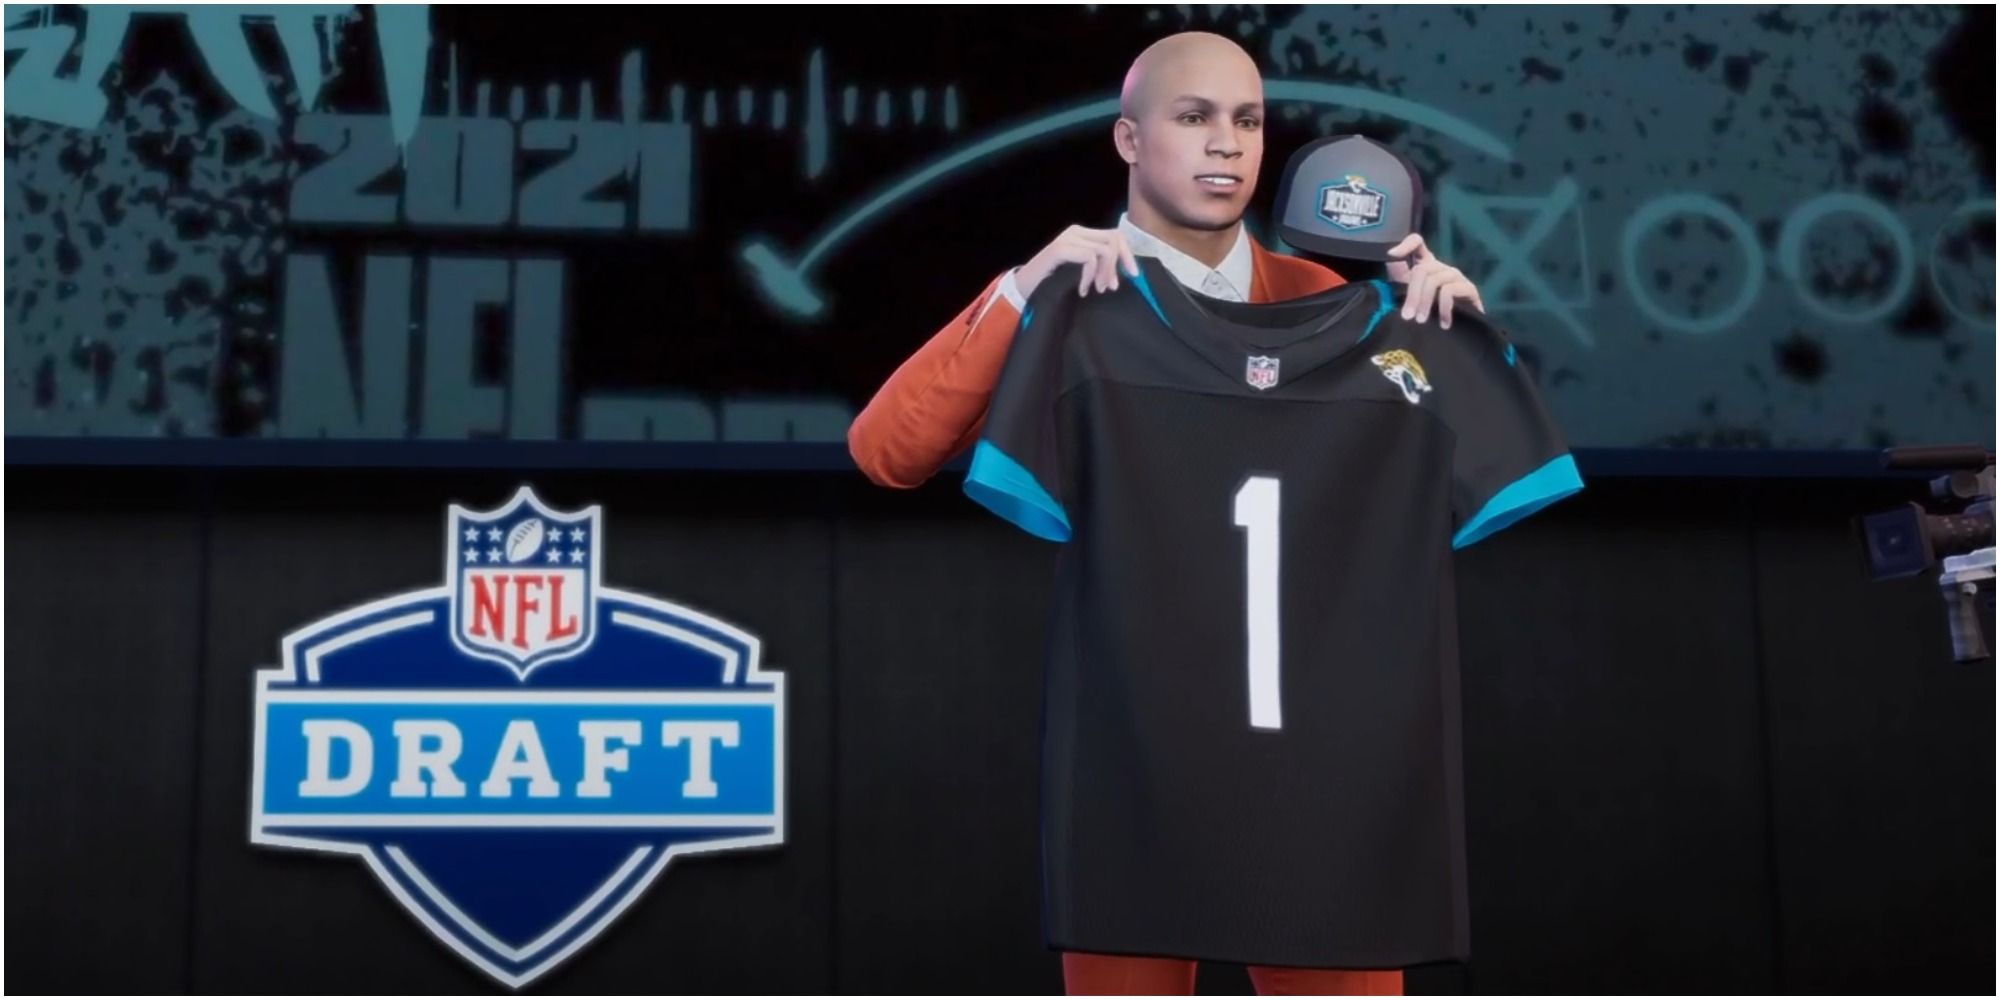 Madden NFL 22 Being Drafted First By The Jaguars